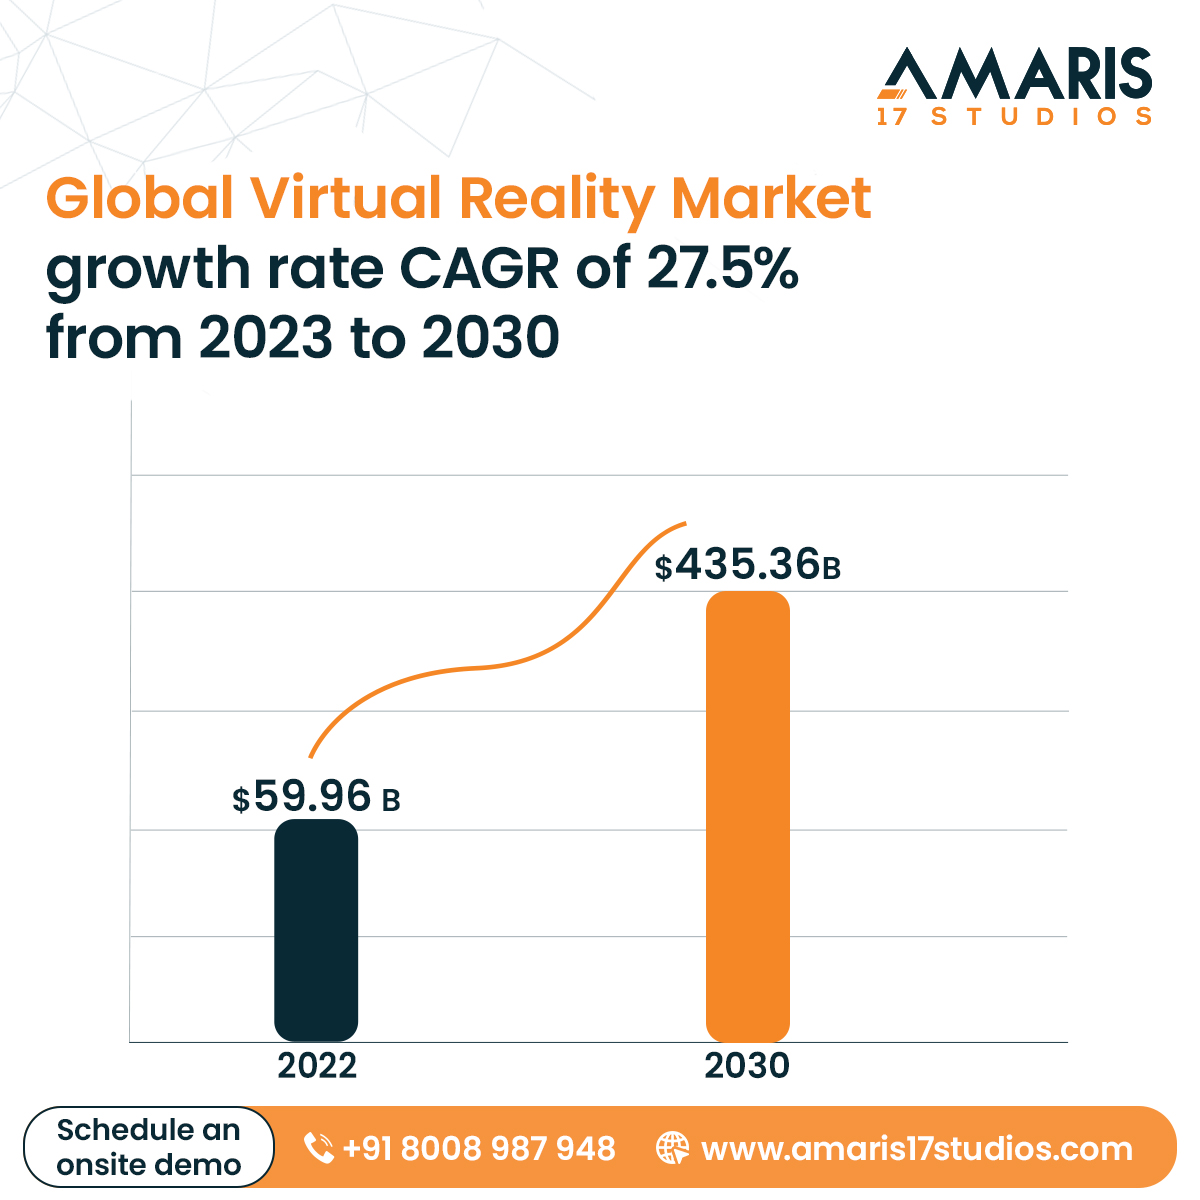 Global Virtual Reality market size of $59.96B in 2022 to projected revenue of $435.36B by 2030, the journey ahead is fueled by a remarkable CAGR of 27.5%! 🚀 

For AR/VR solutions contact us: 
☎️: 8008987948
Web: amaris17studios.com

#FutureUnleashed #GrowthMomentum